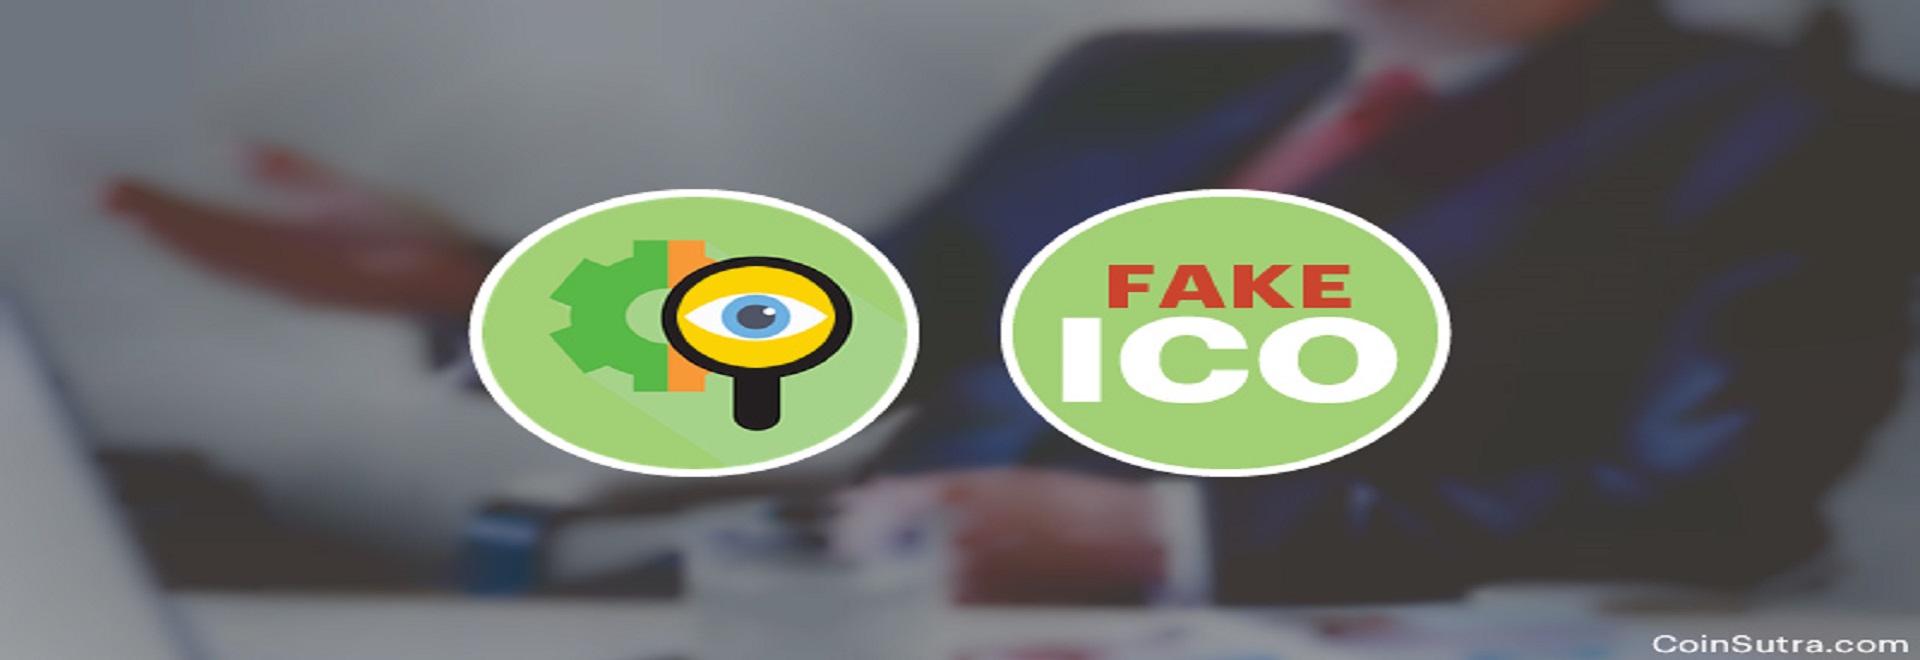 Detect Fake ICO Initial Coin Offerings - صفحه اصلی